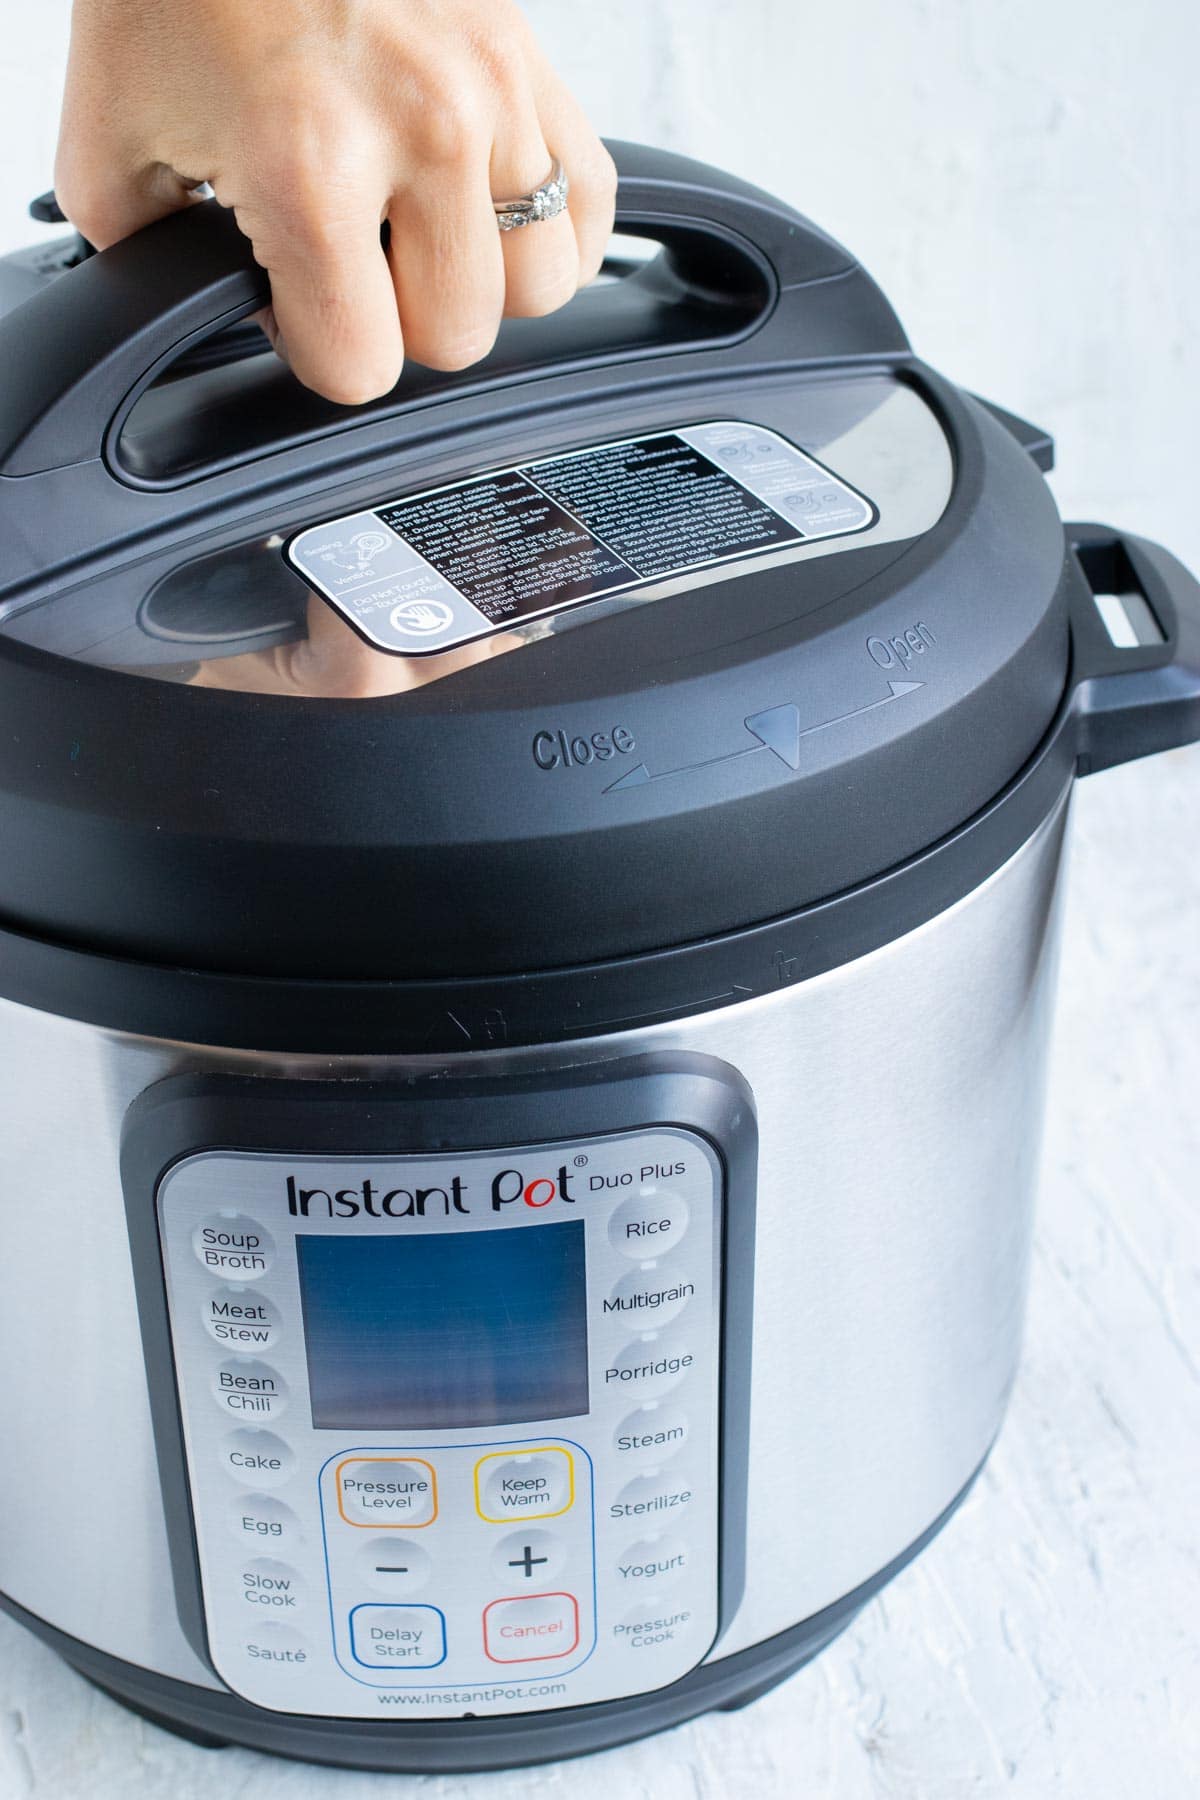 Demonstrating how to remove and put on the lid so it is tightly secured on an Instant Pot.